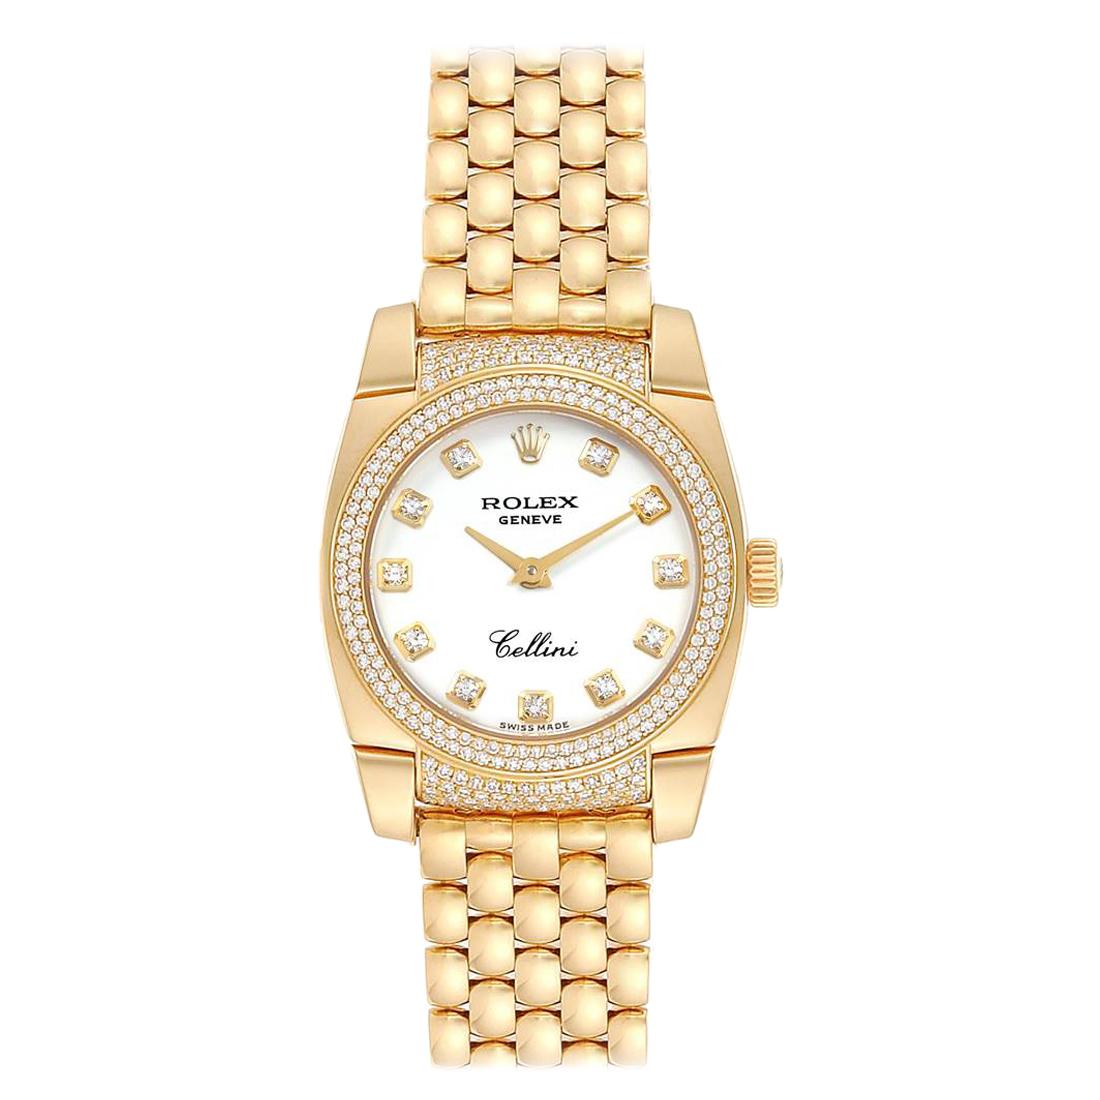 Rolex Cellini Cestello Yellow Gold Diamond Ladies Watch 6311 Box Papers For Sale